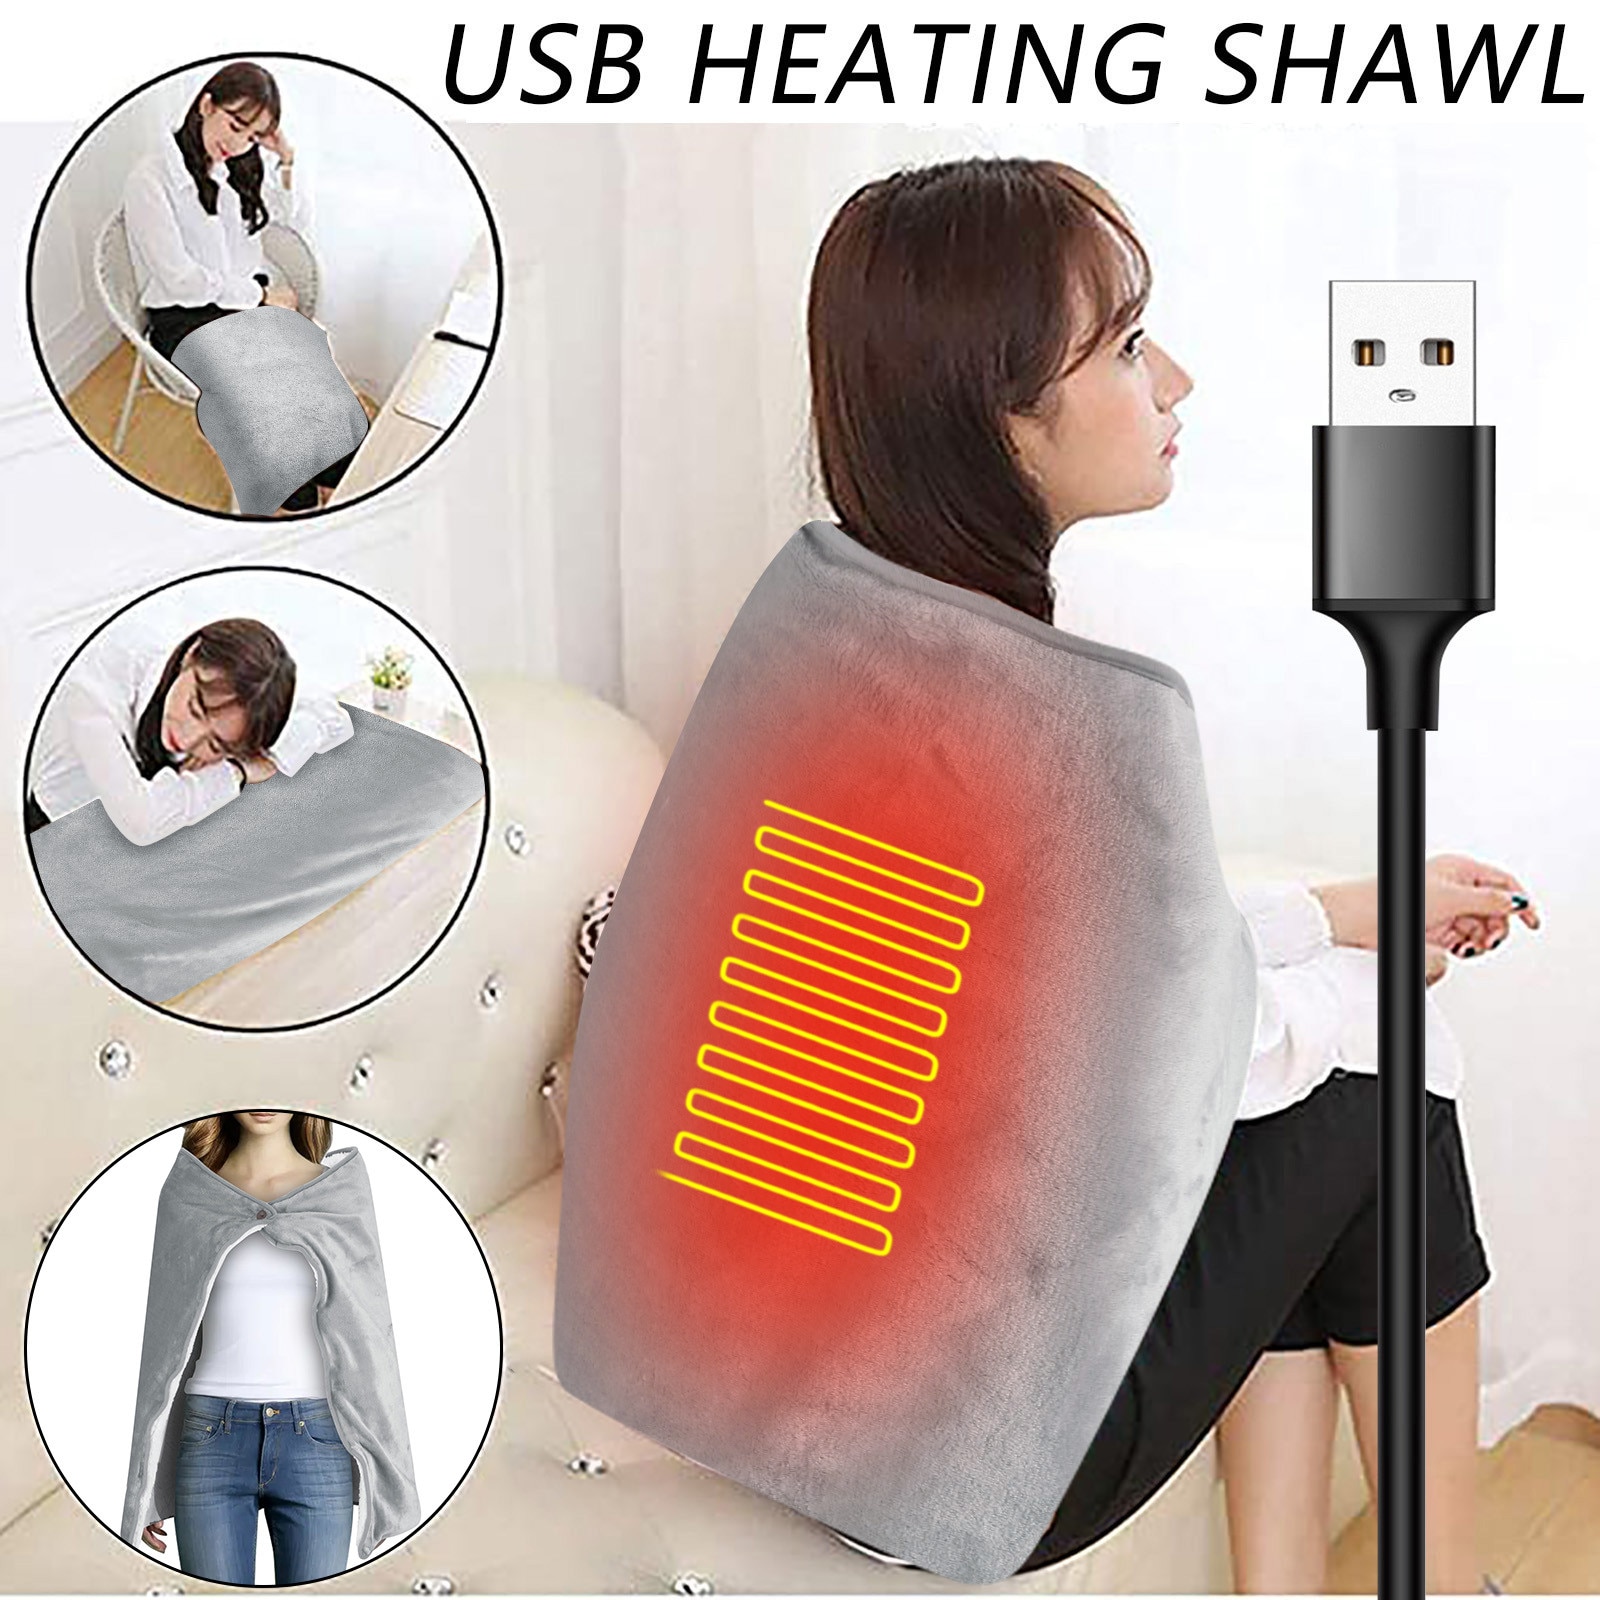 Usb Heated Warm Blanket Soft Electric Blanket For Couch Heated Blanket Electric Throw Warming Shawl Lap Blankets For Home Office